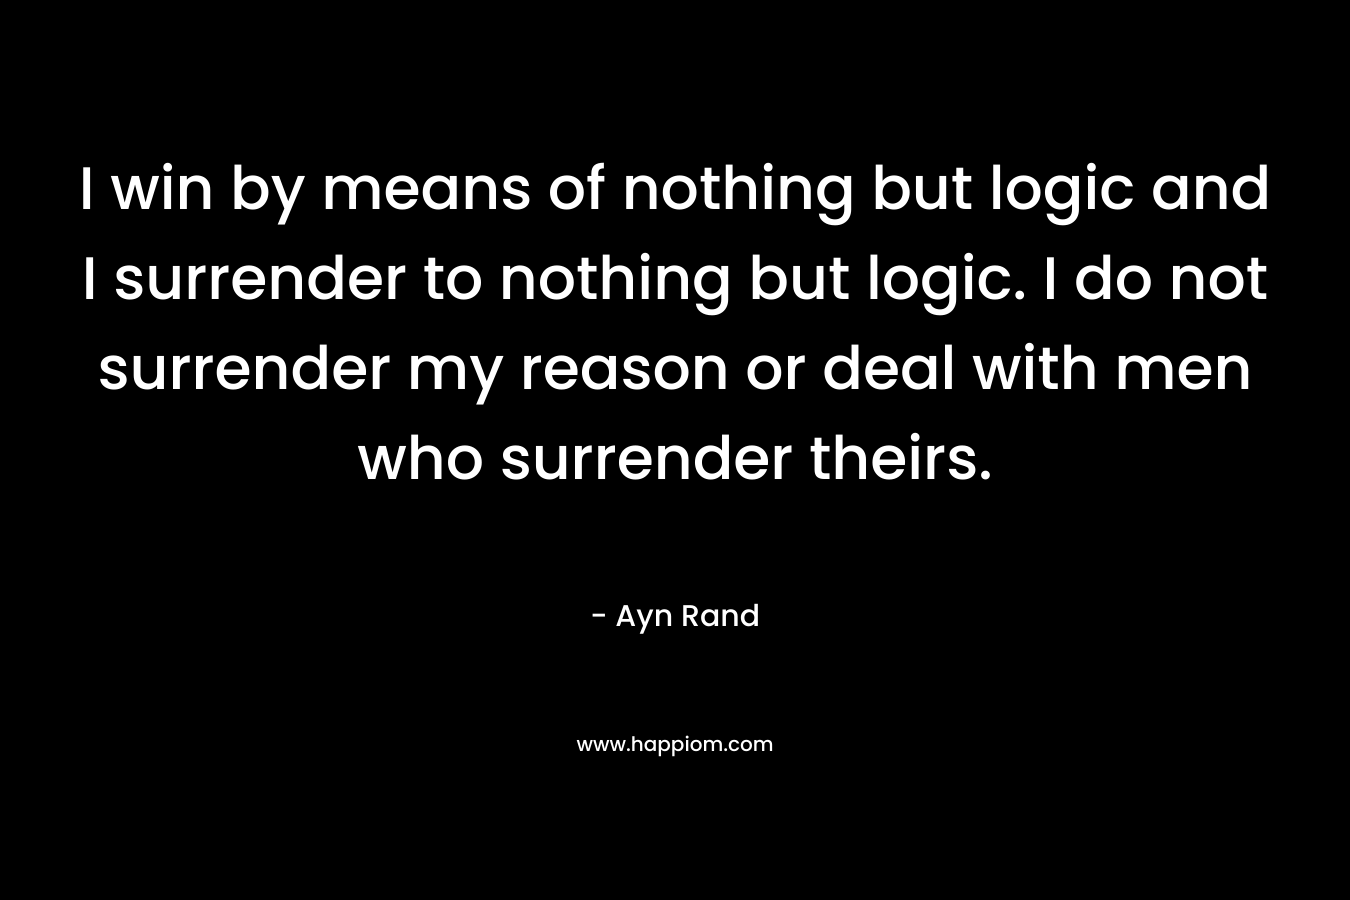 I win by means of nothing but logic and I surrender to nothing but logic. I do not surrender my reason or deal with men who surrender theirs.